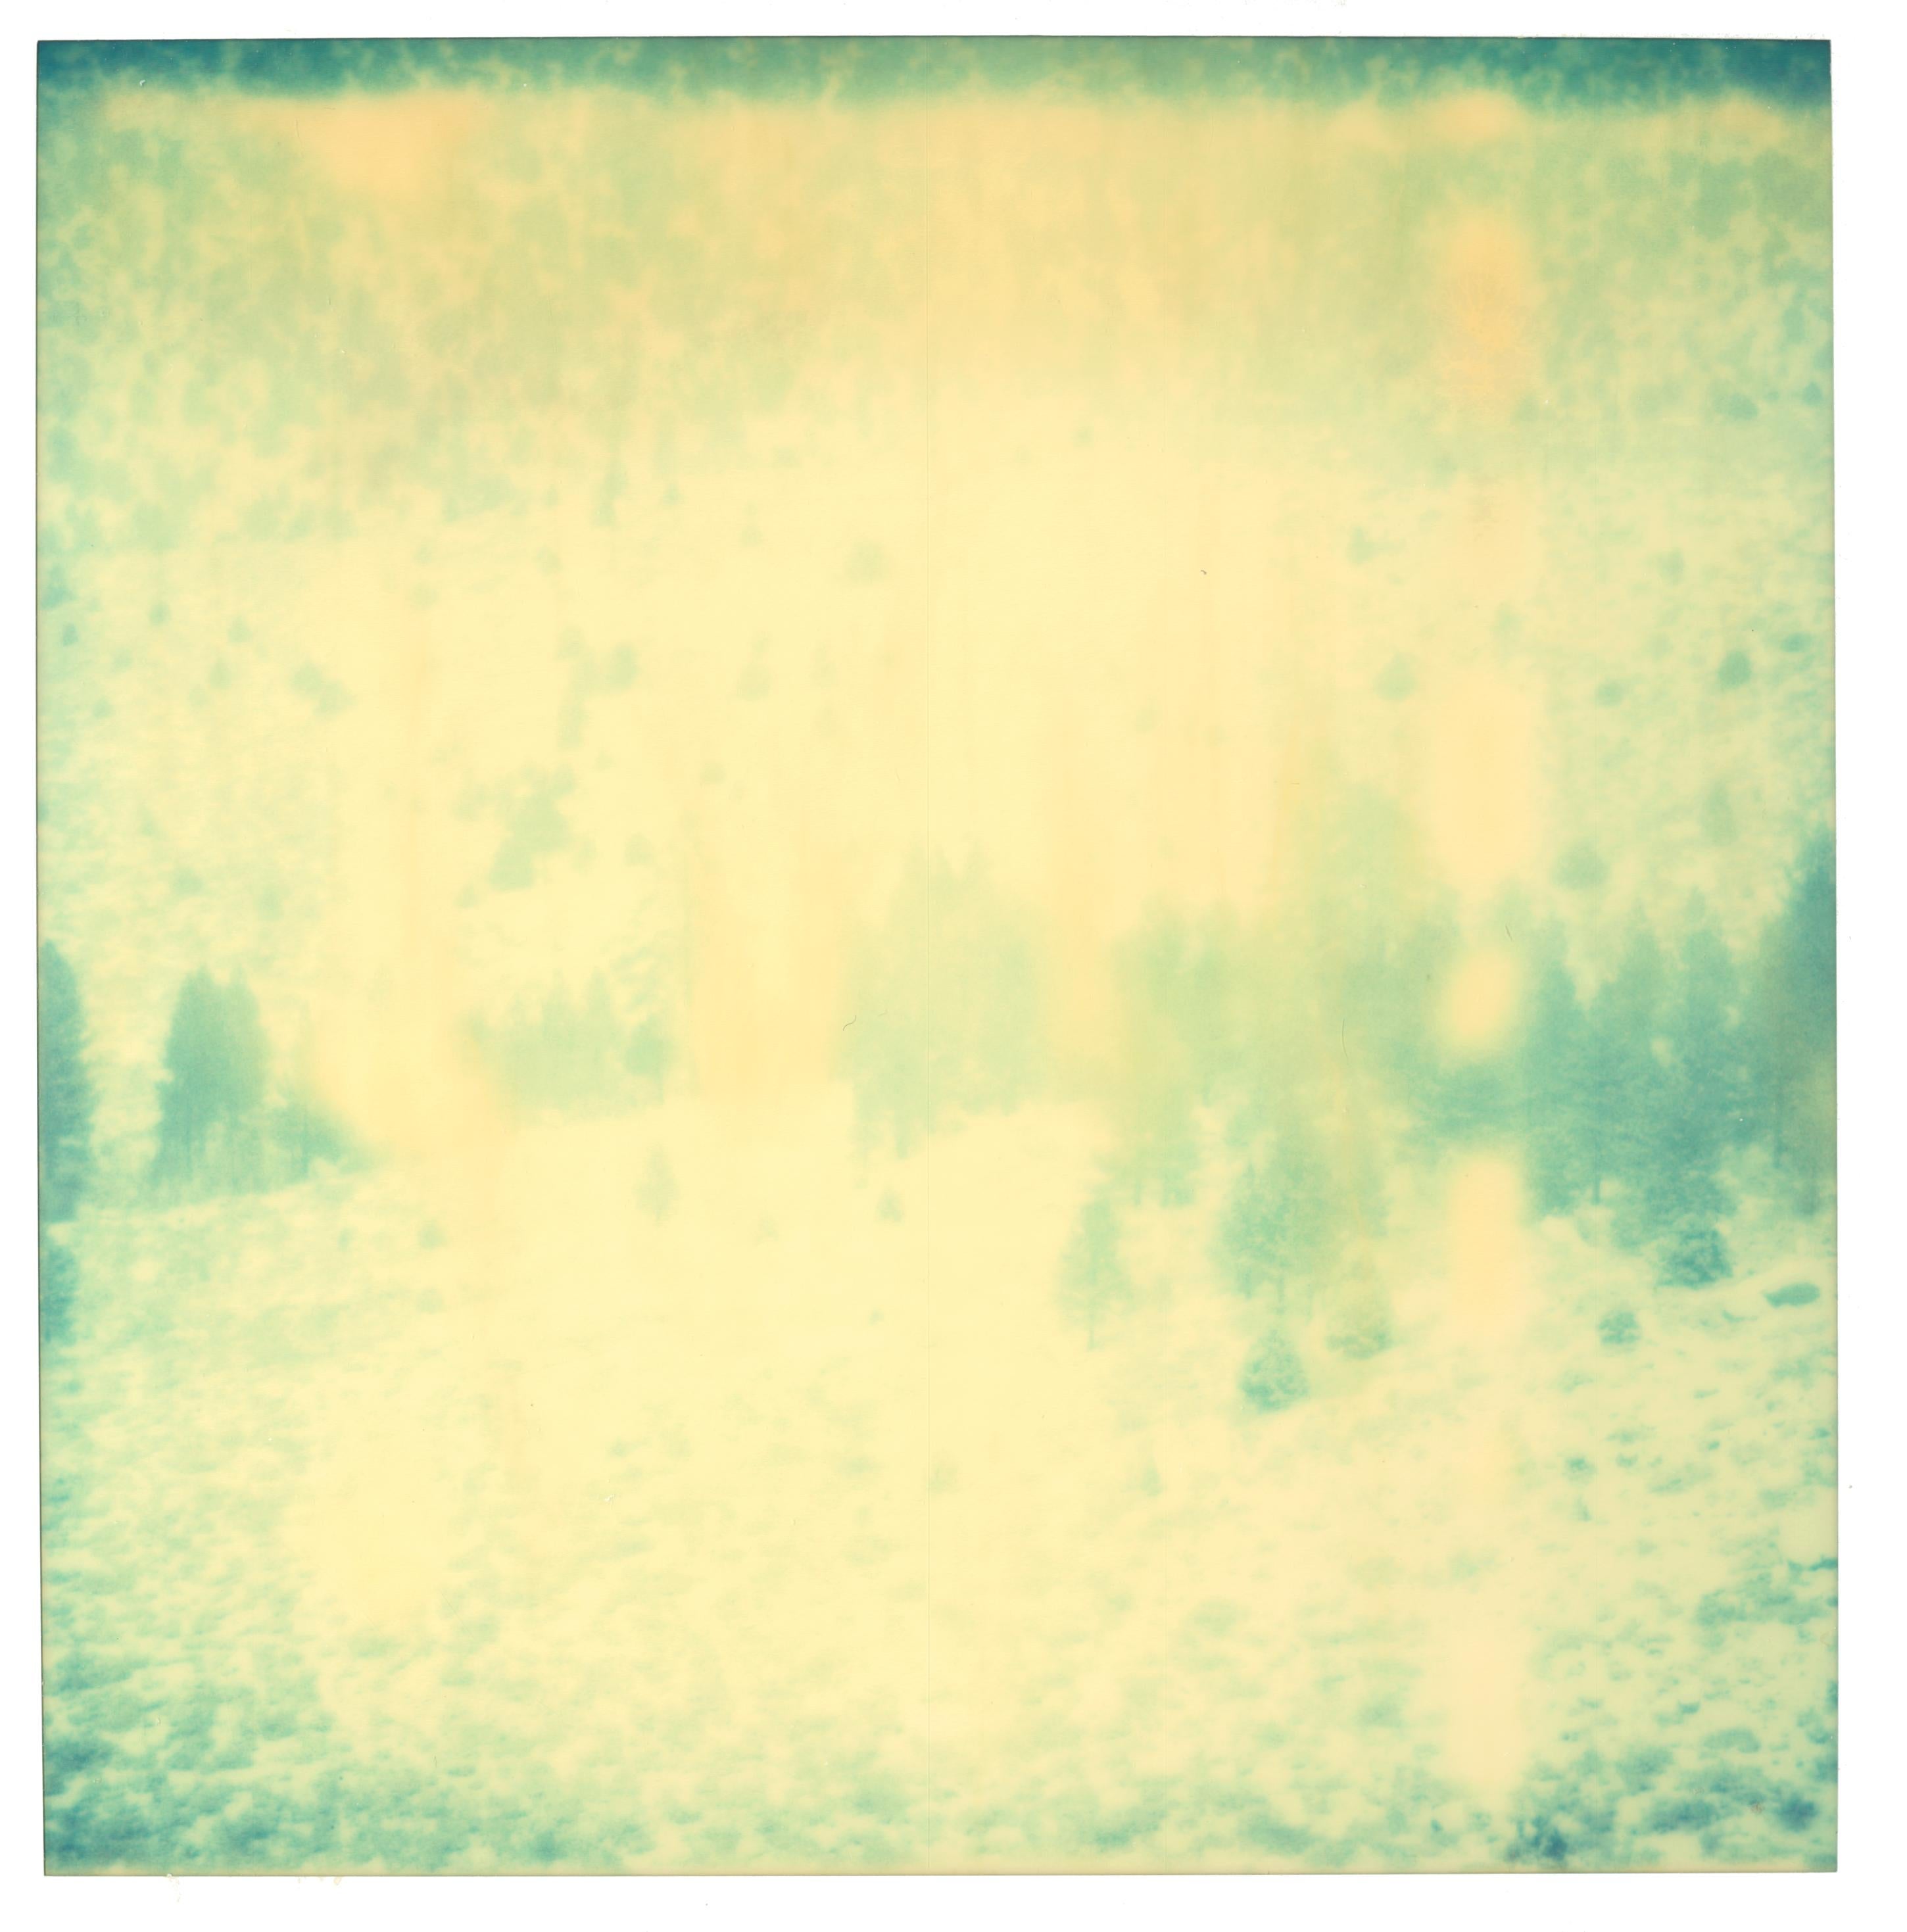 Memories of Green II, triptych - 2003 

Edition 2/5,
each 58x56cm, installed with gaps 58x178cm, 
analog C-Print, hand-printed by the artist on Fuji Crystal Archive Paper,
based on a Polaroid, Artist inventory Number 1144.02
Certificate and